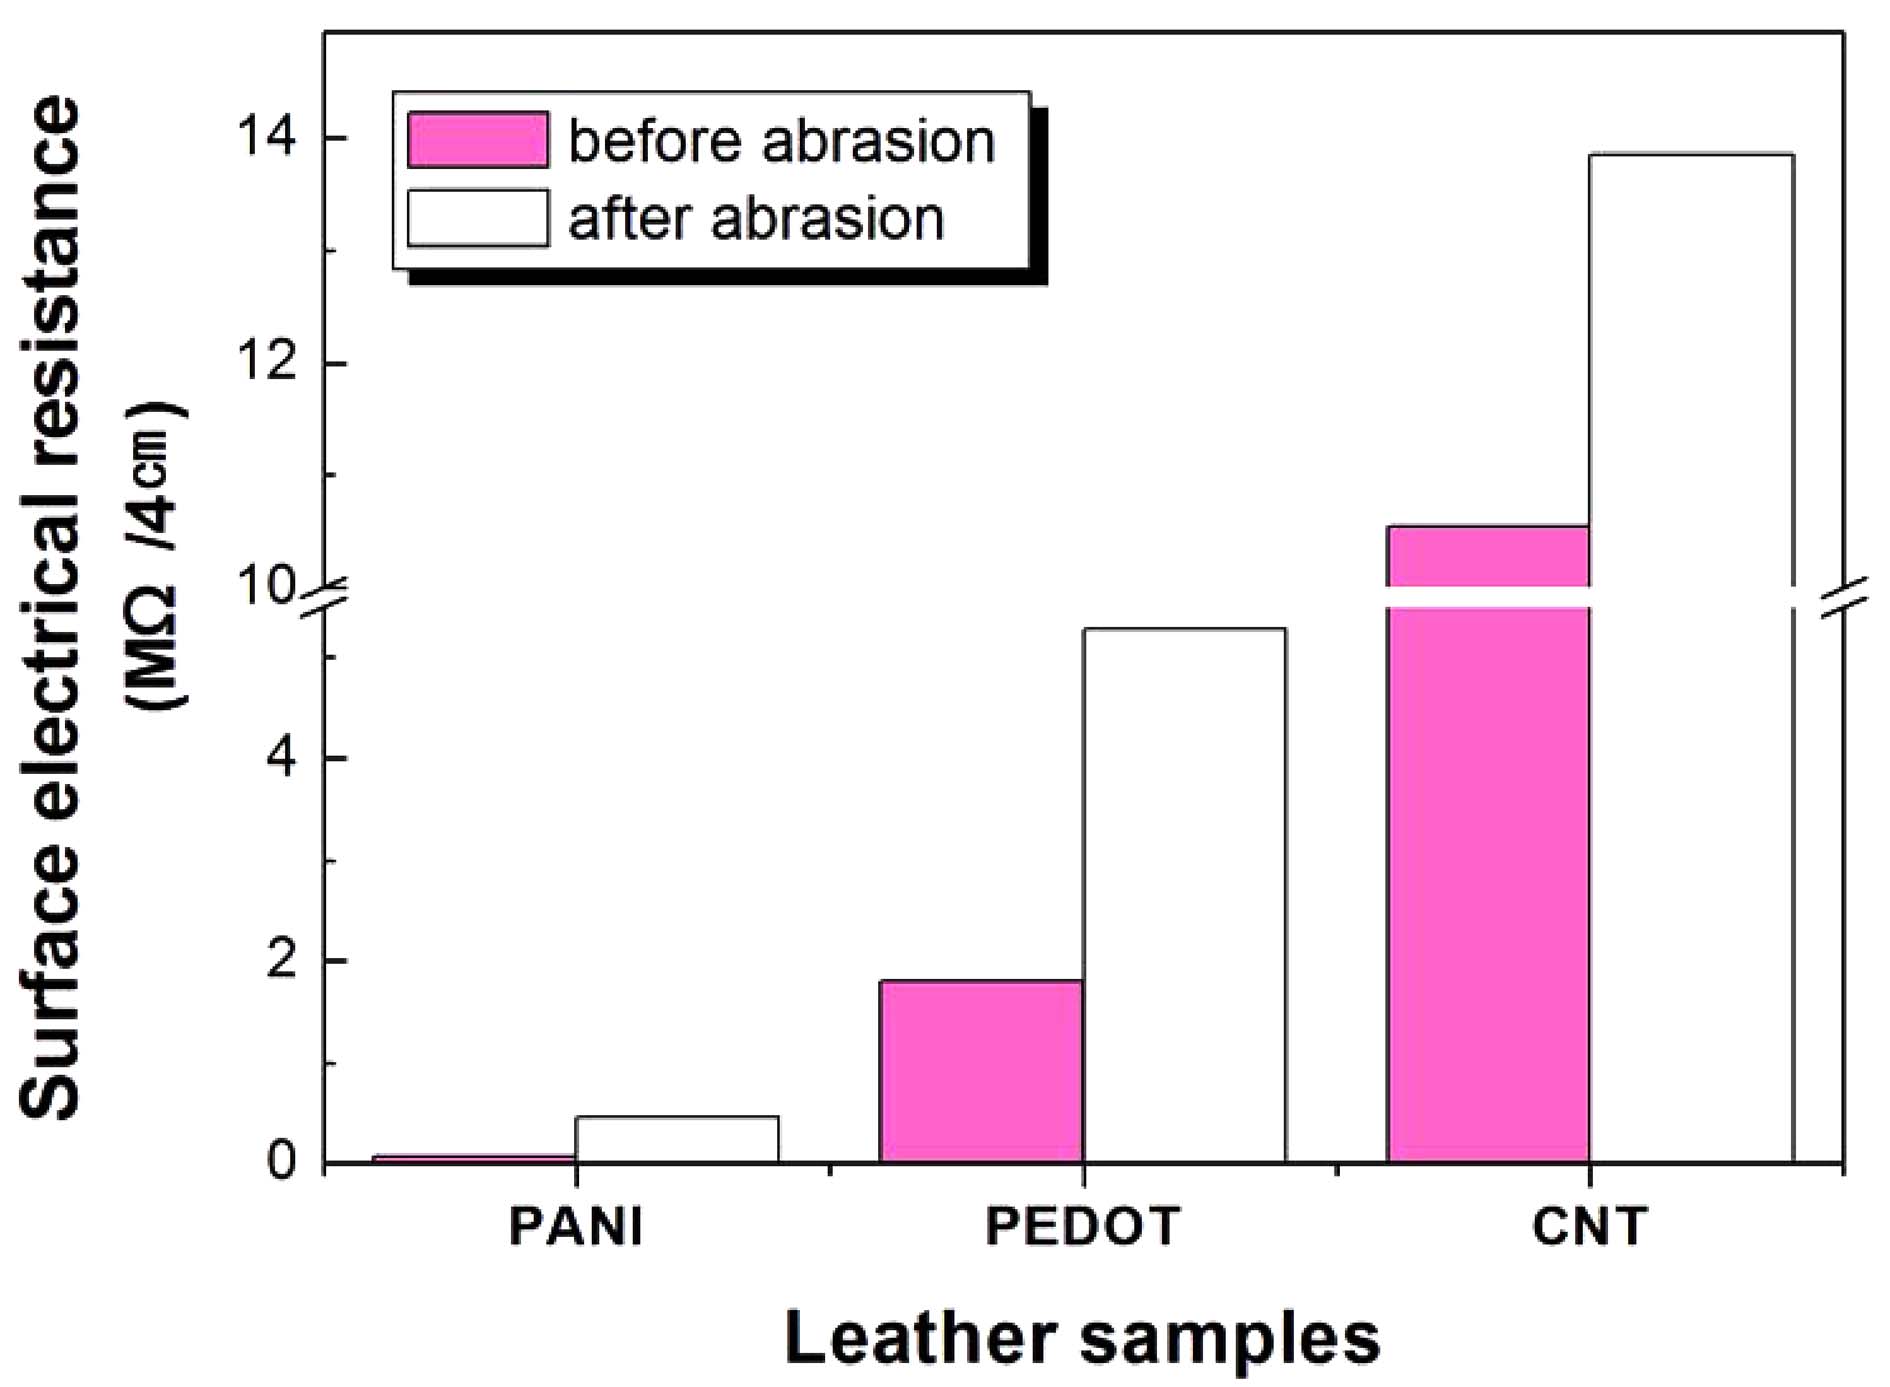 Surface electrical resistances of conductive material treated leather before and after 50 cycles of abrasion through crockmeter.